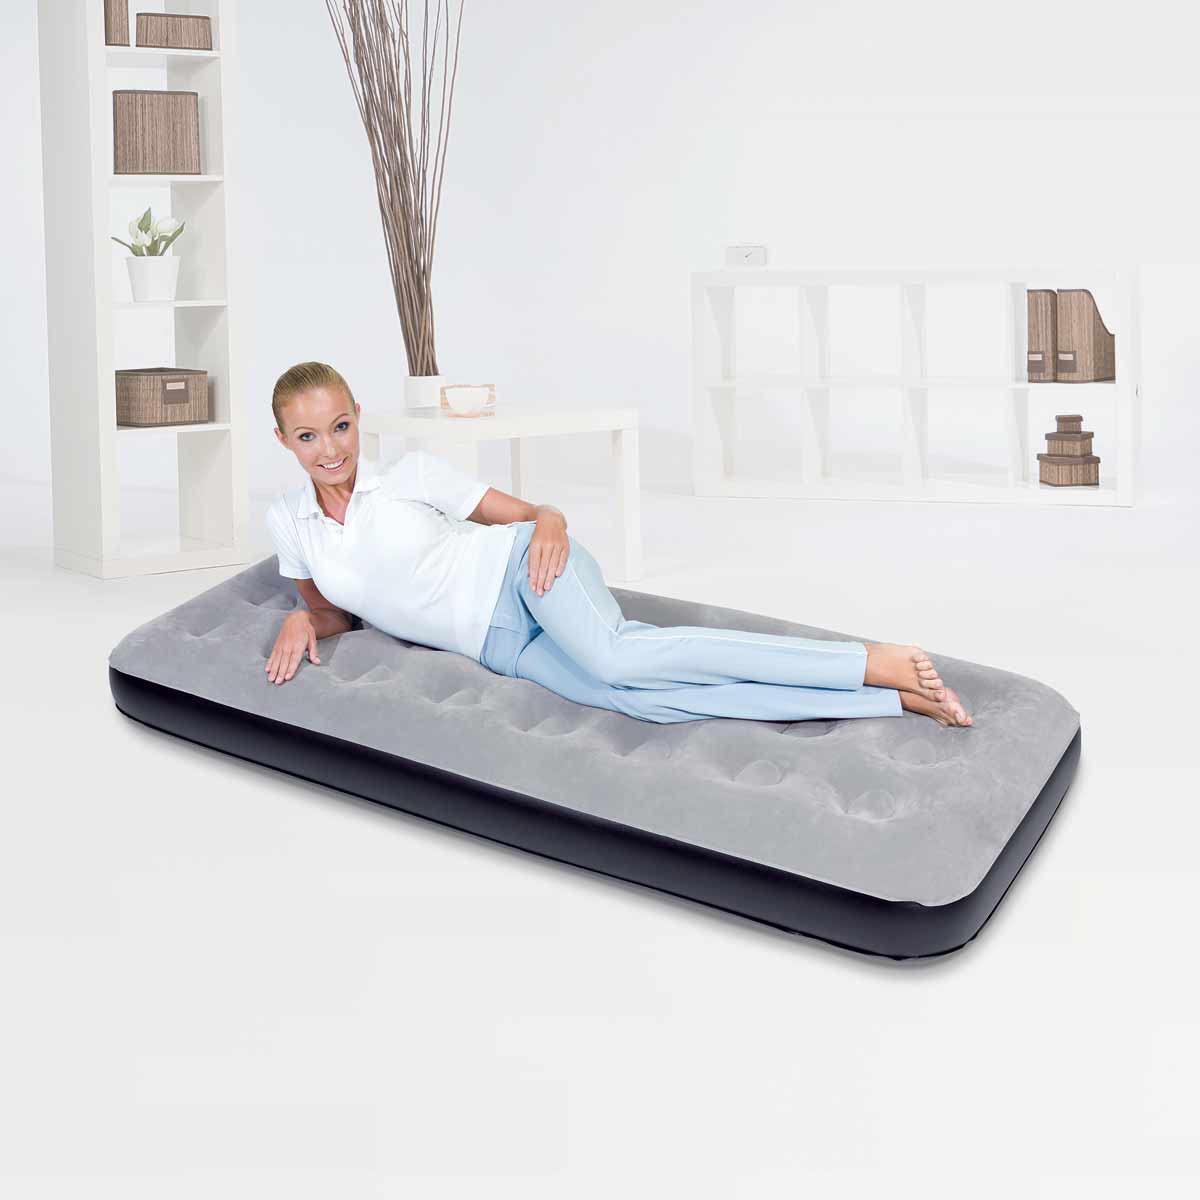 FLOCKED AIR - Inflatable bed - single bed